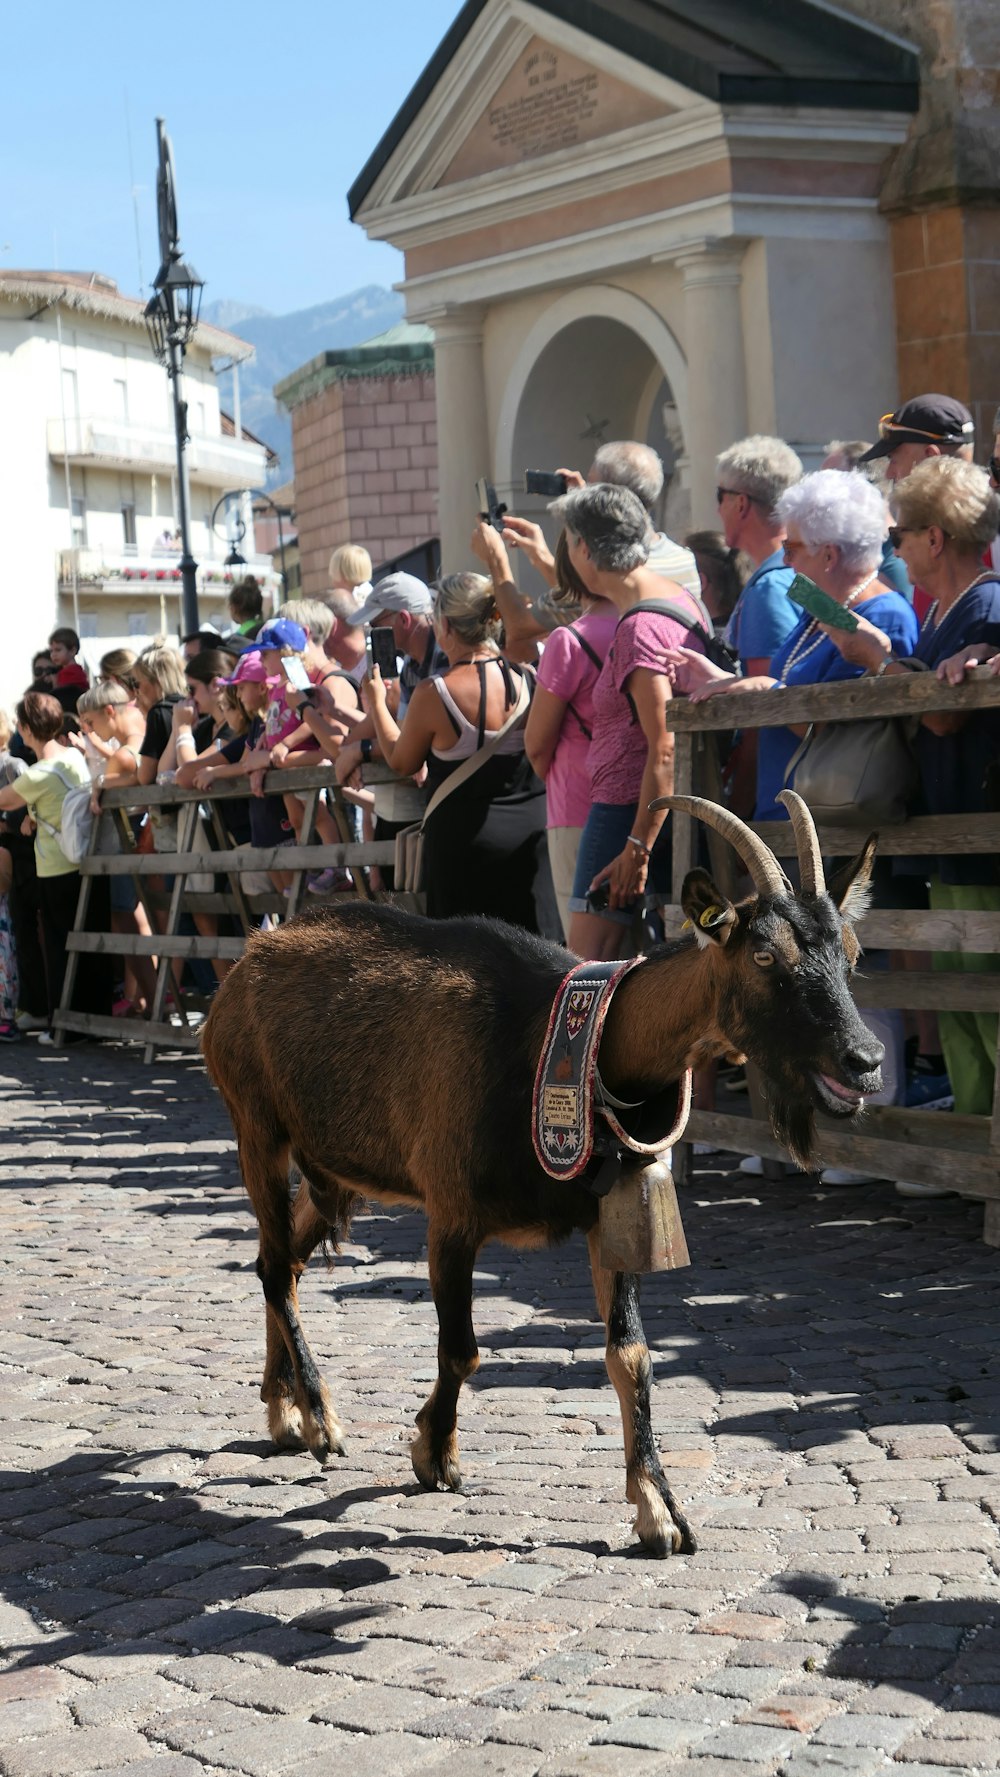 a brown goat walking down a street next to a crowd of people